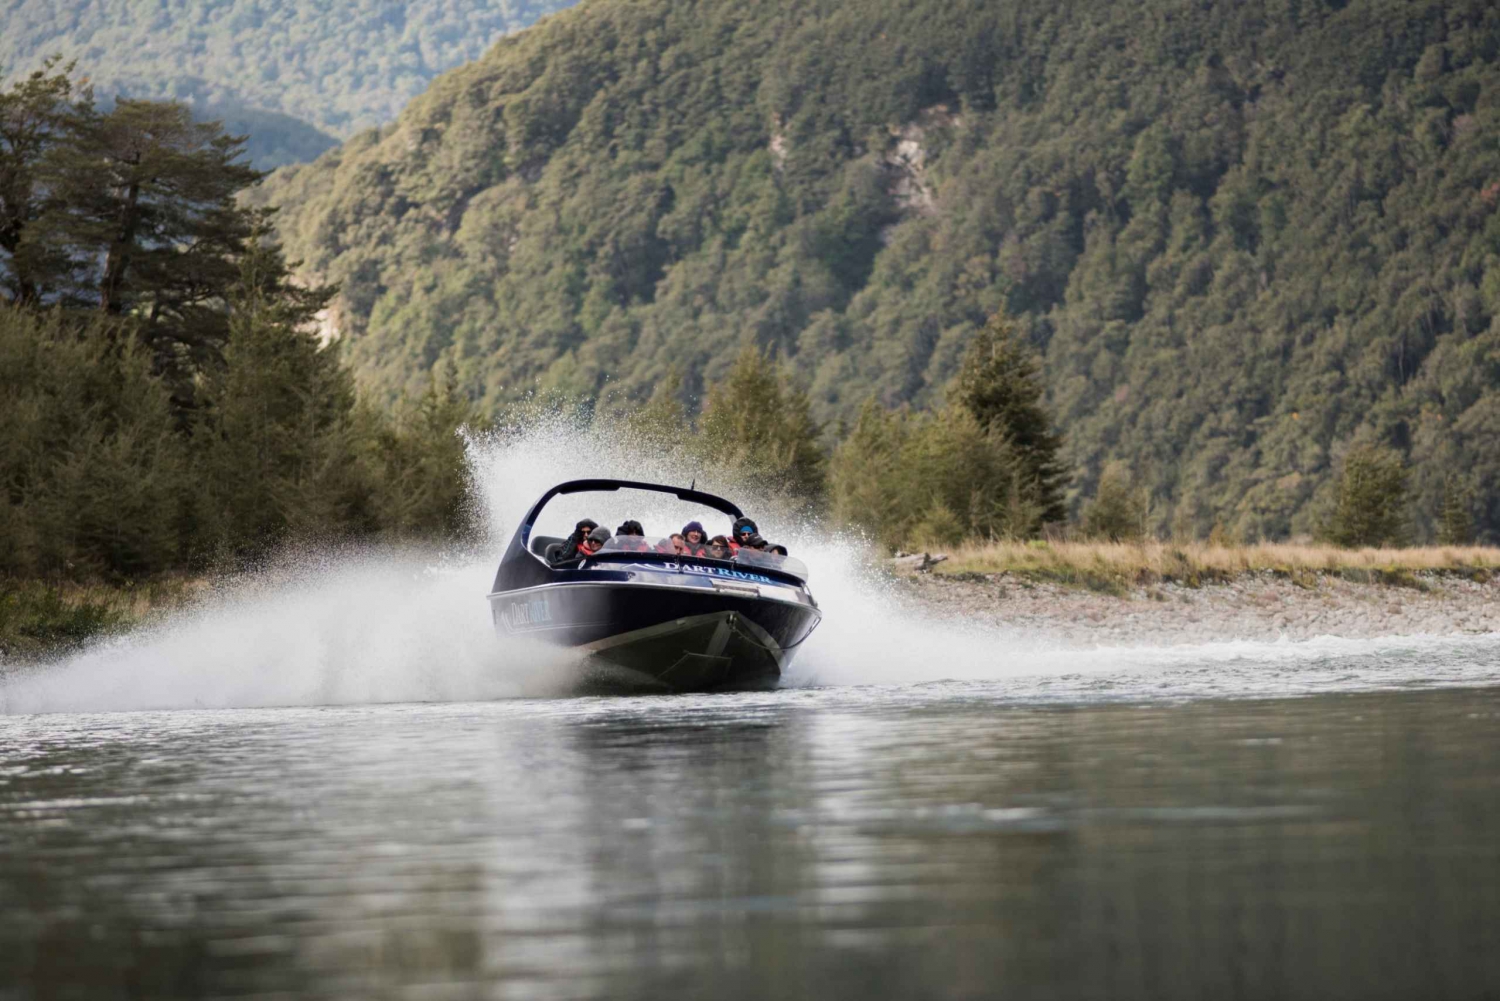 Queenstown: Dart River Canoe and Jet Boat Paradise Day Trip